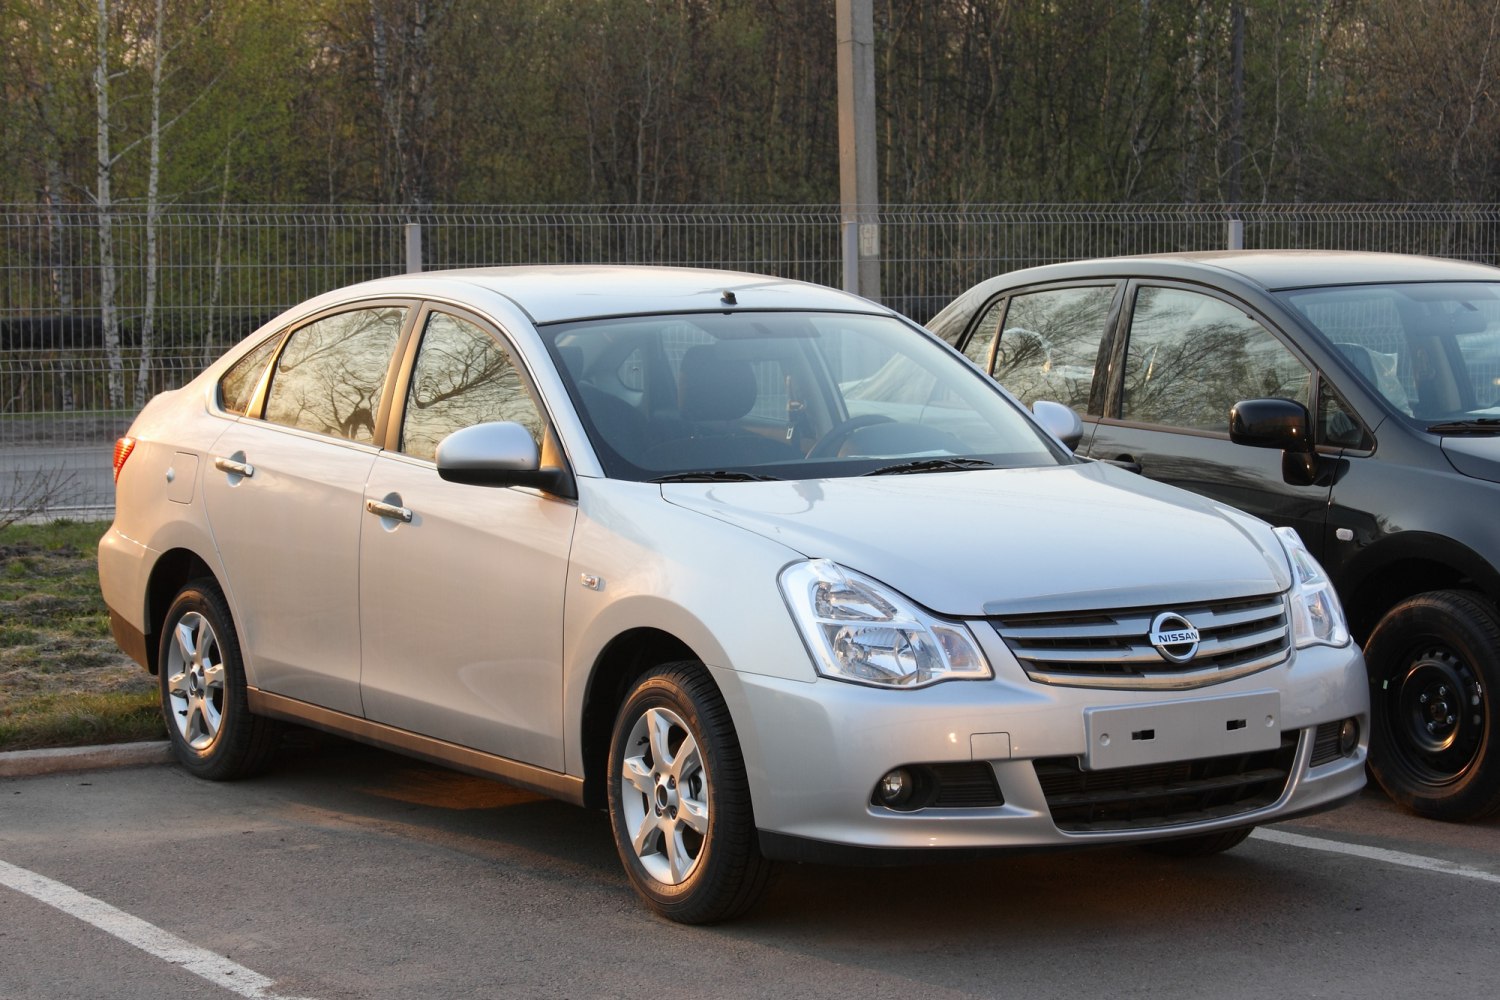 Nissan Almera technical specifications and fuel economy